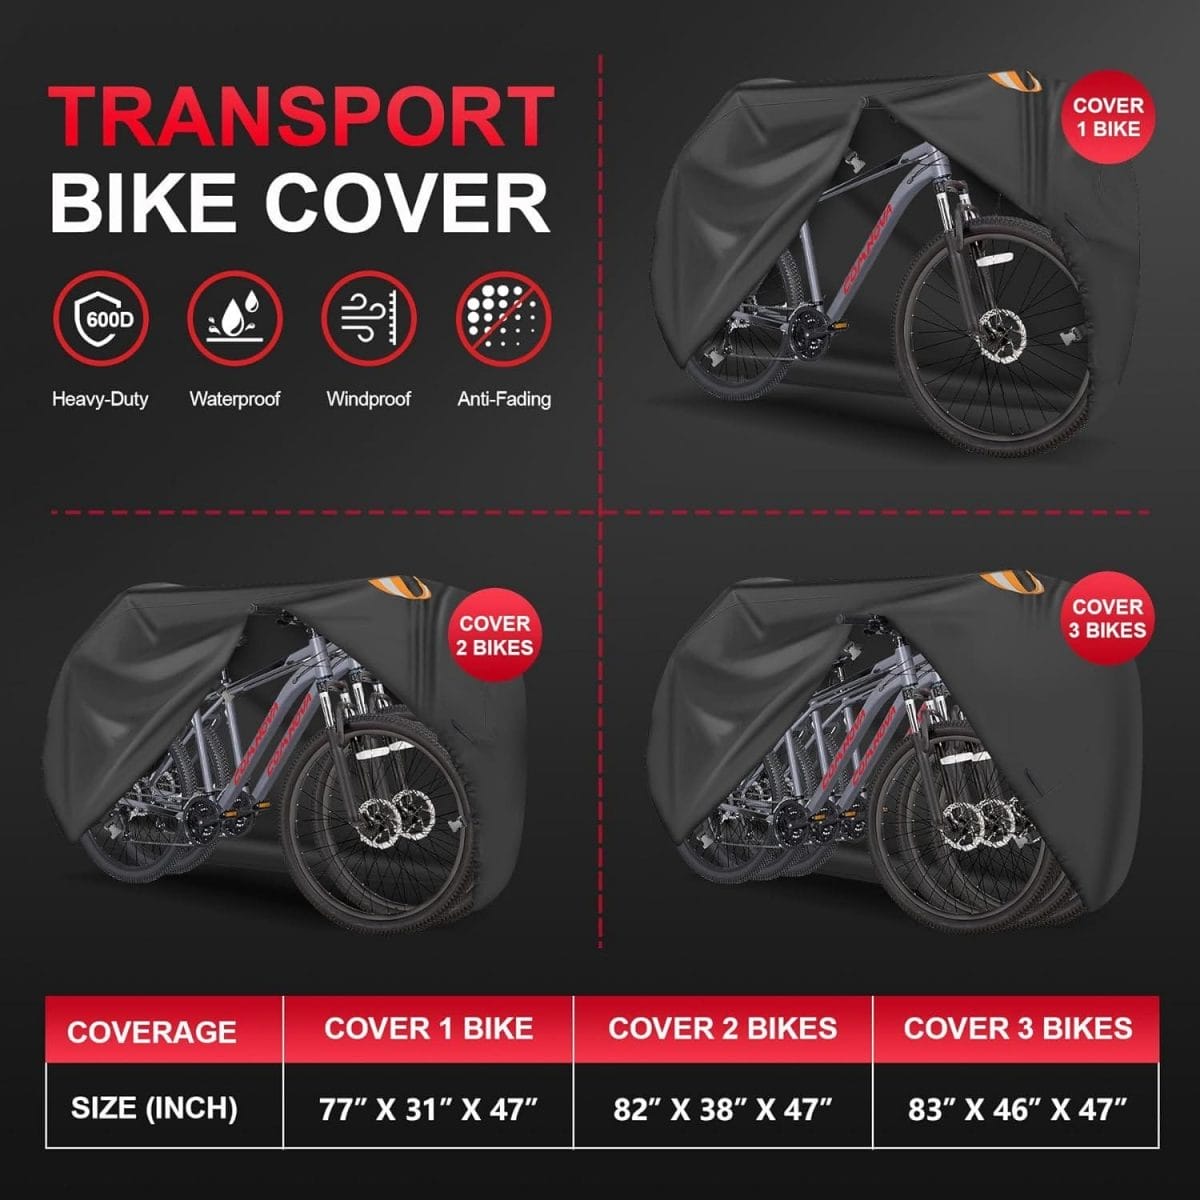 Amazon.com : Comnova Bike Cover for Transport 2 Bikes - Outdoor Bike Covers for 2 Bikes on Rear Bike Rack Transport Waterproof  Heavy Duty, 600D Bicycle Rack Covers for 2 Bikes on Car Hitch Travel Storage : Sports  Outdoors